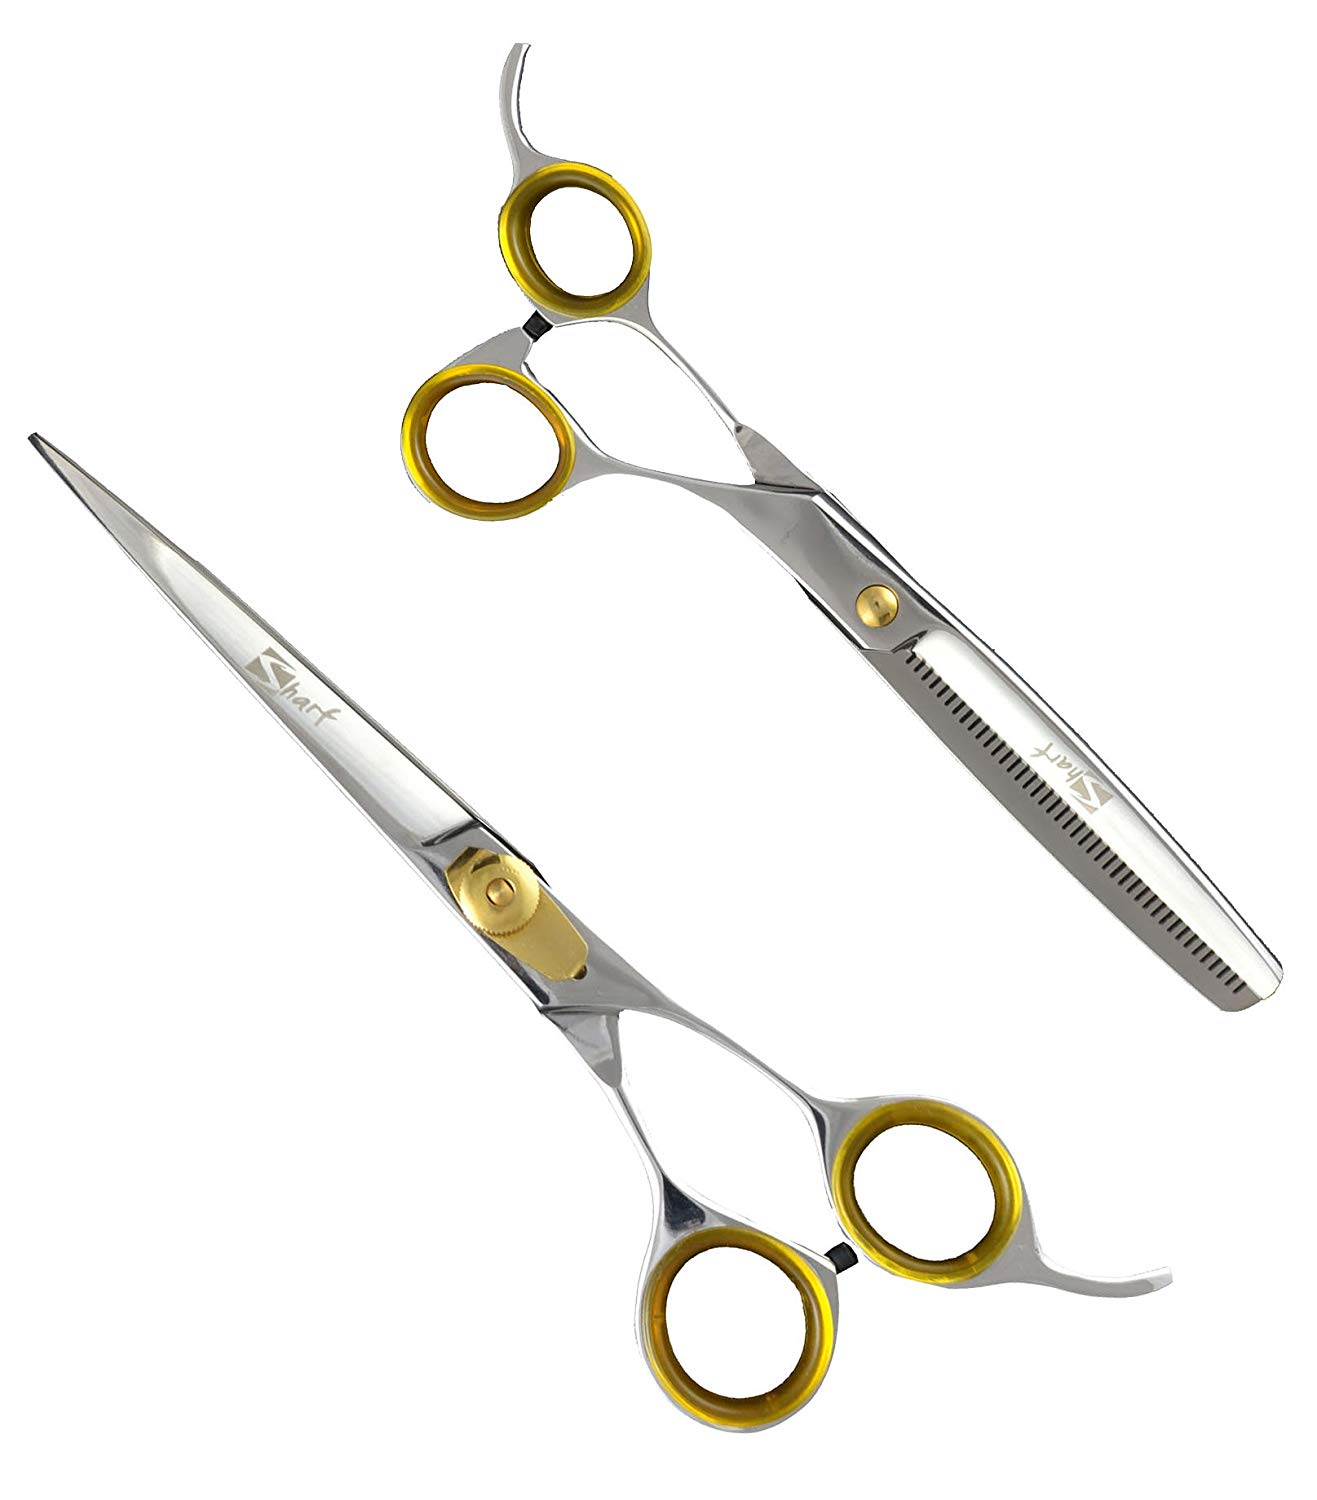 Cool gold double faucet 6/5.5 inch professional cutting scissors and  thinning scissors hairdresser special modeling tools